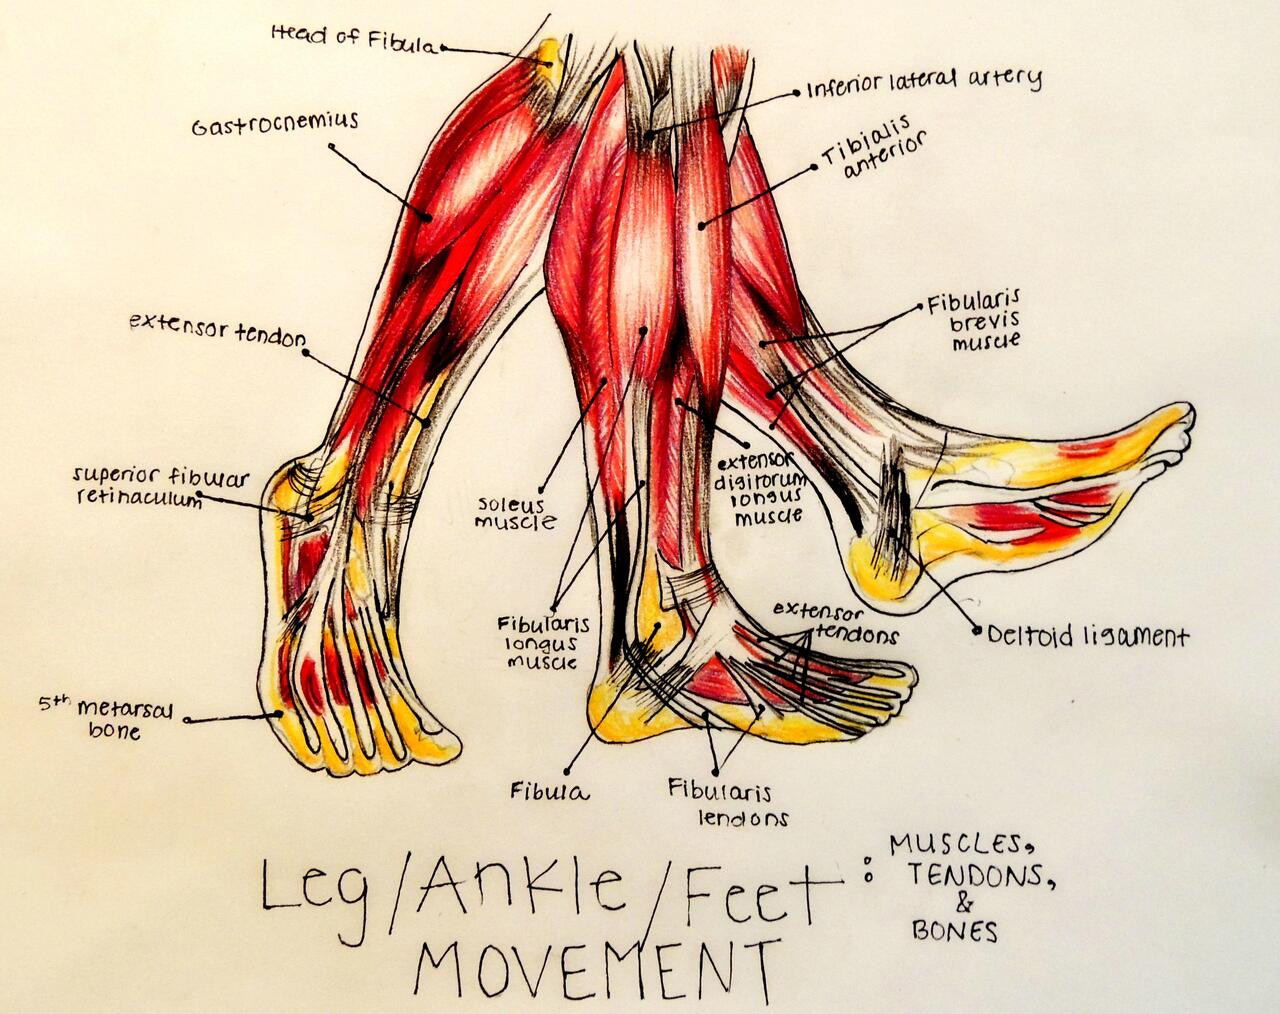 Anatomical study drawing of muscle movement in the legs, ankles, and feet.